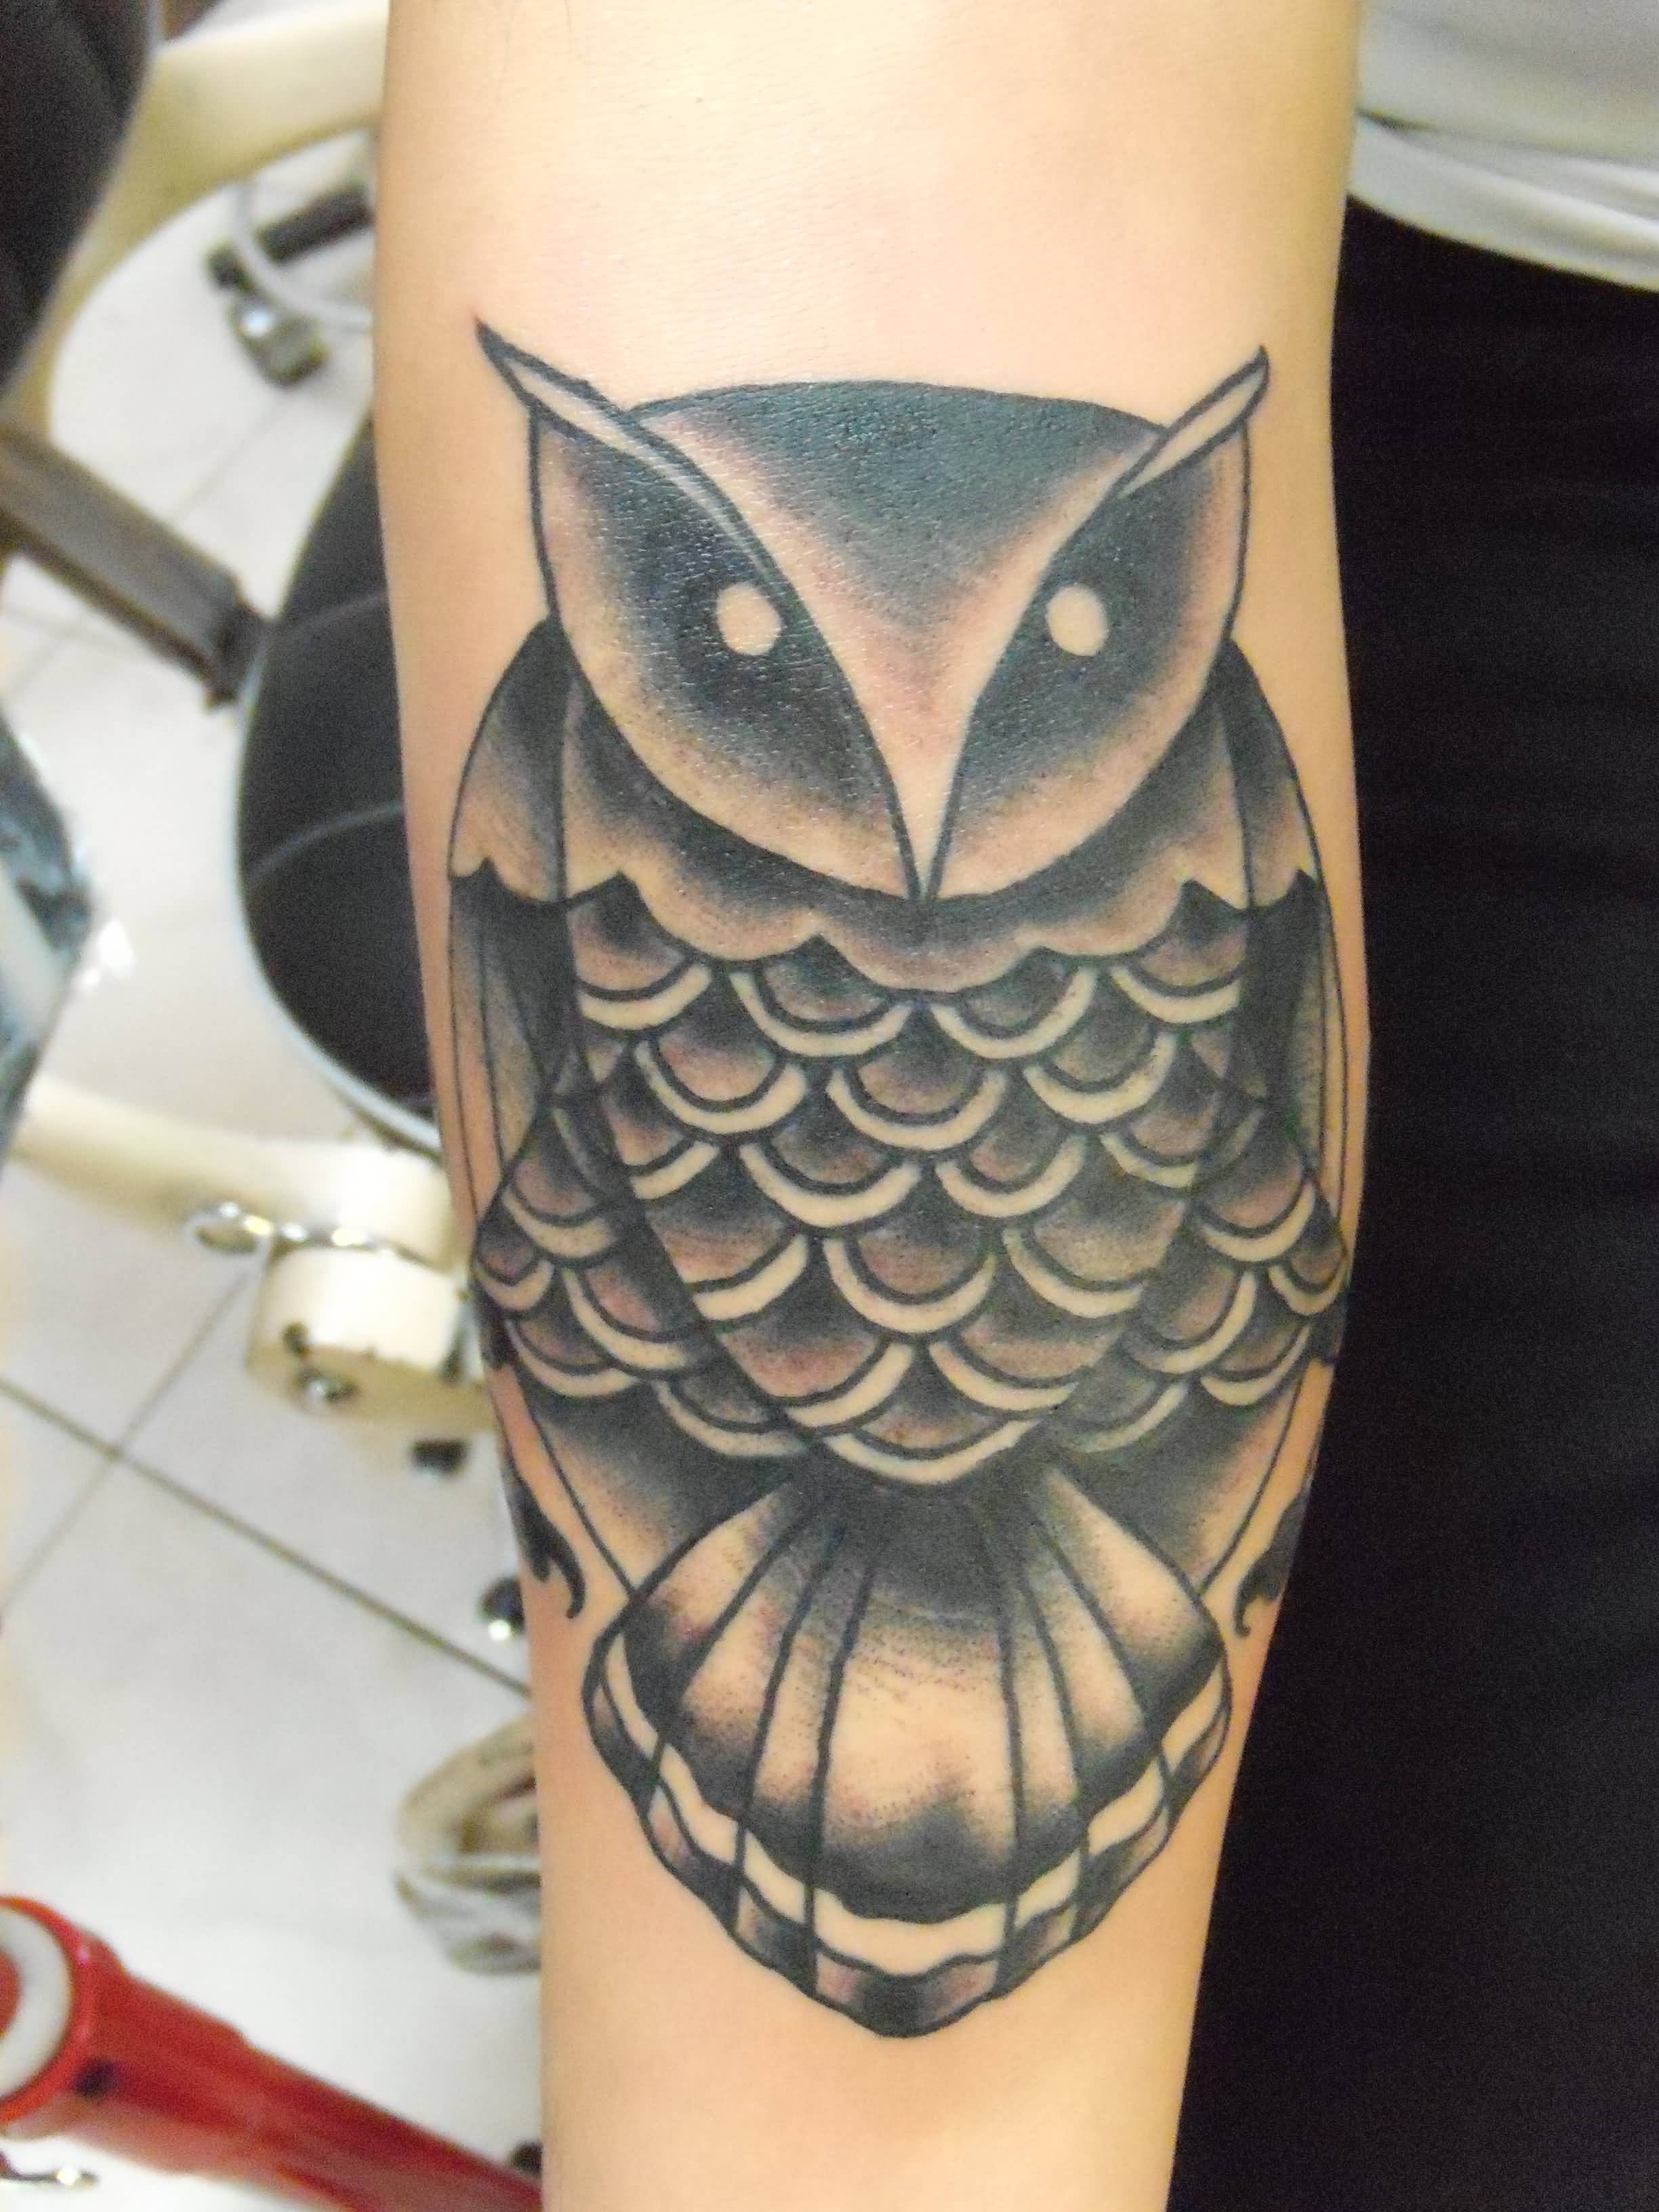 Classic Black Ink Owl Tattoo On Right Forearm